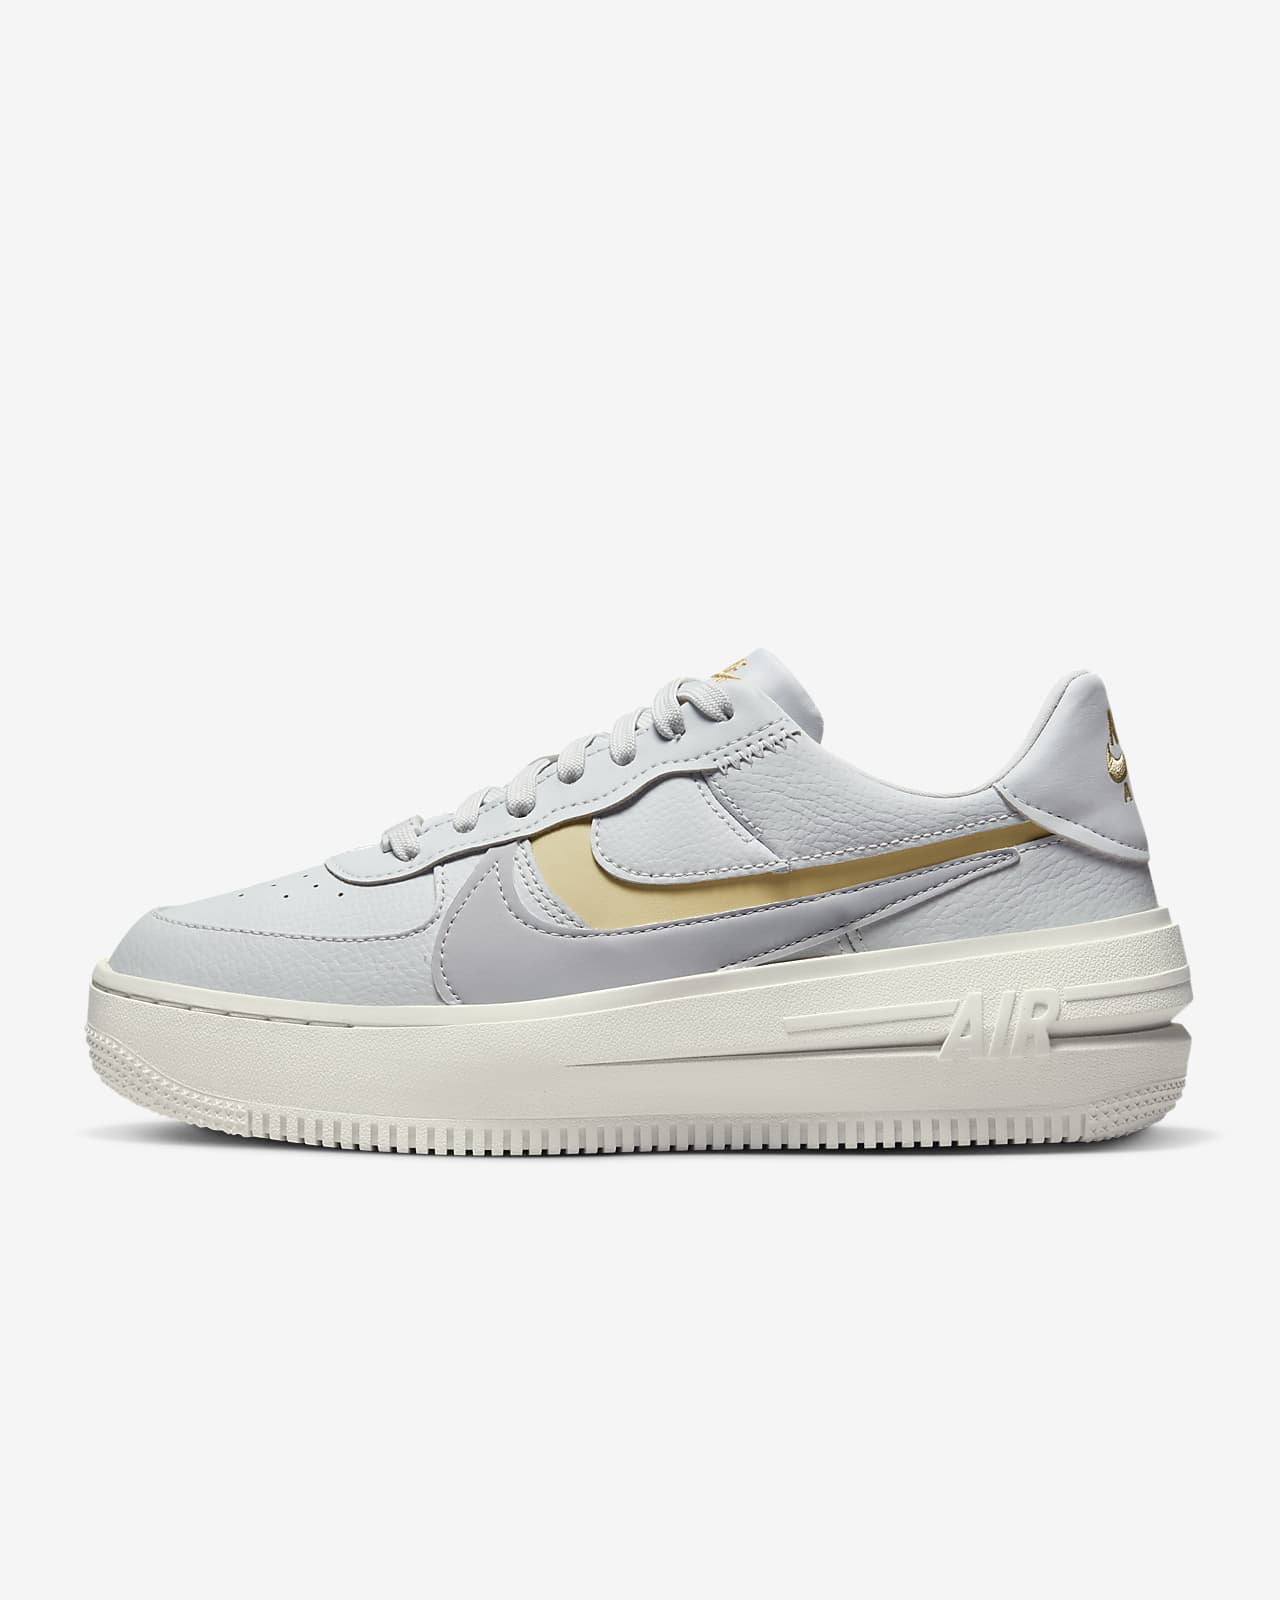 Chaussures Nike Air Force 1 pour Femme. Nike FR